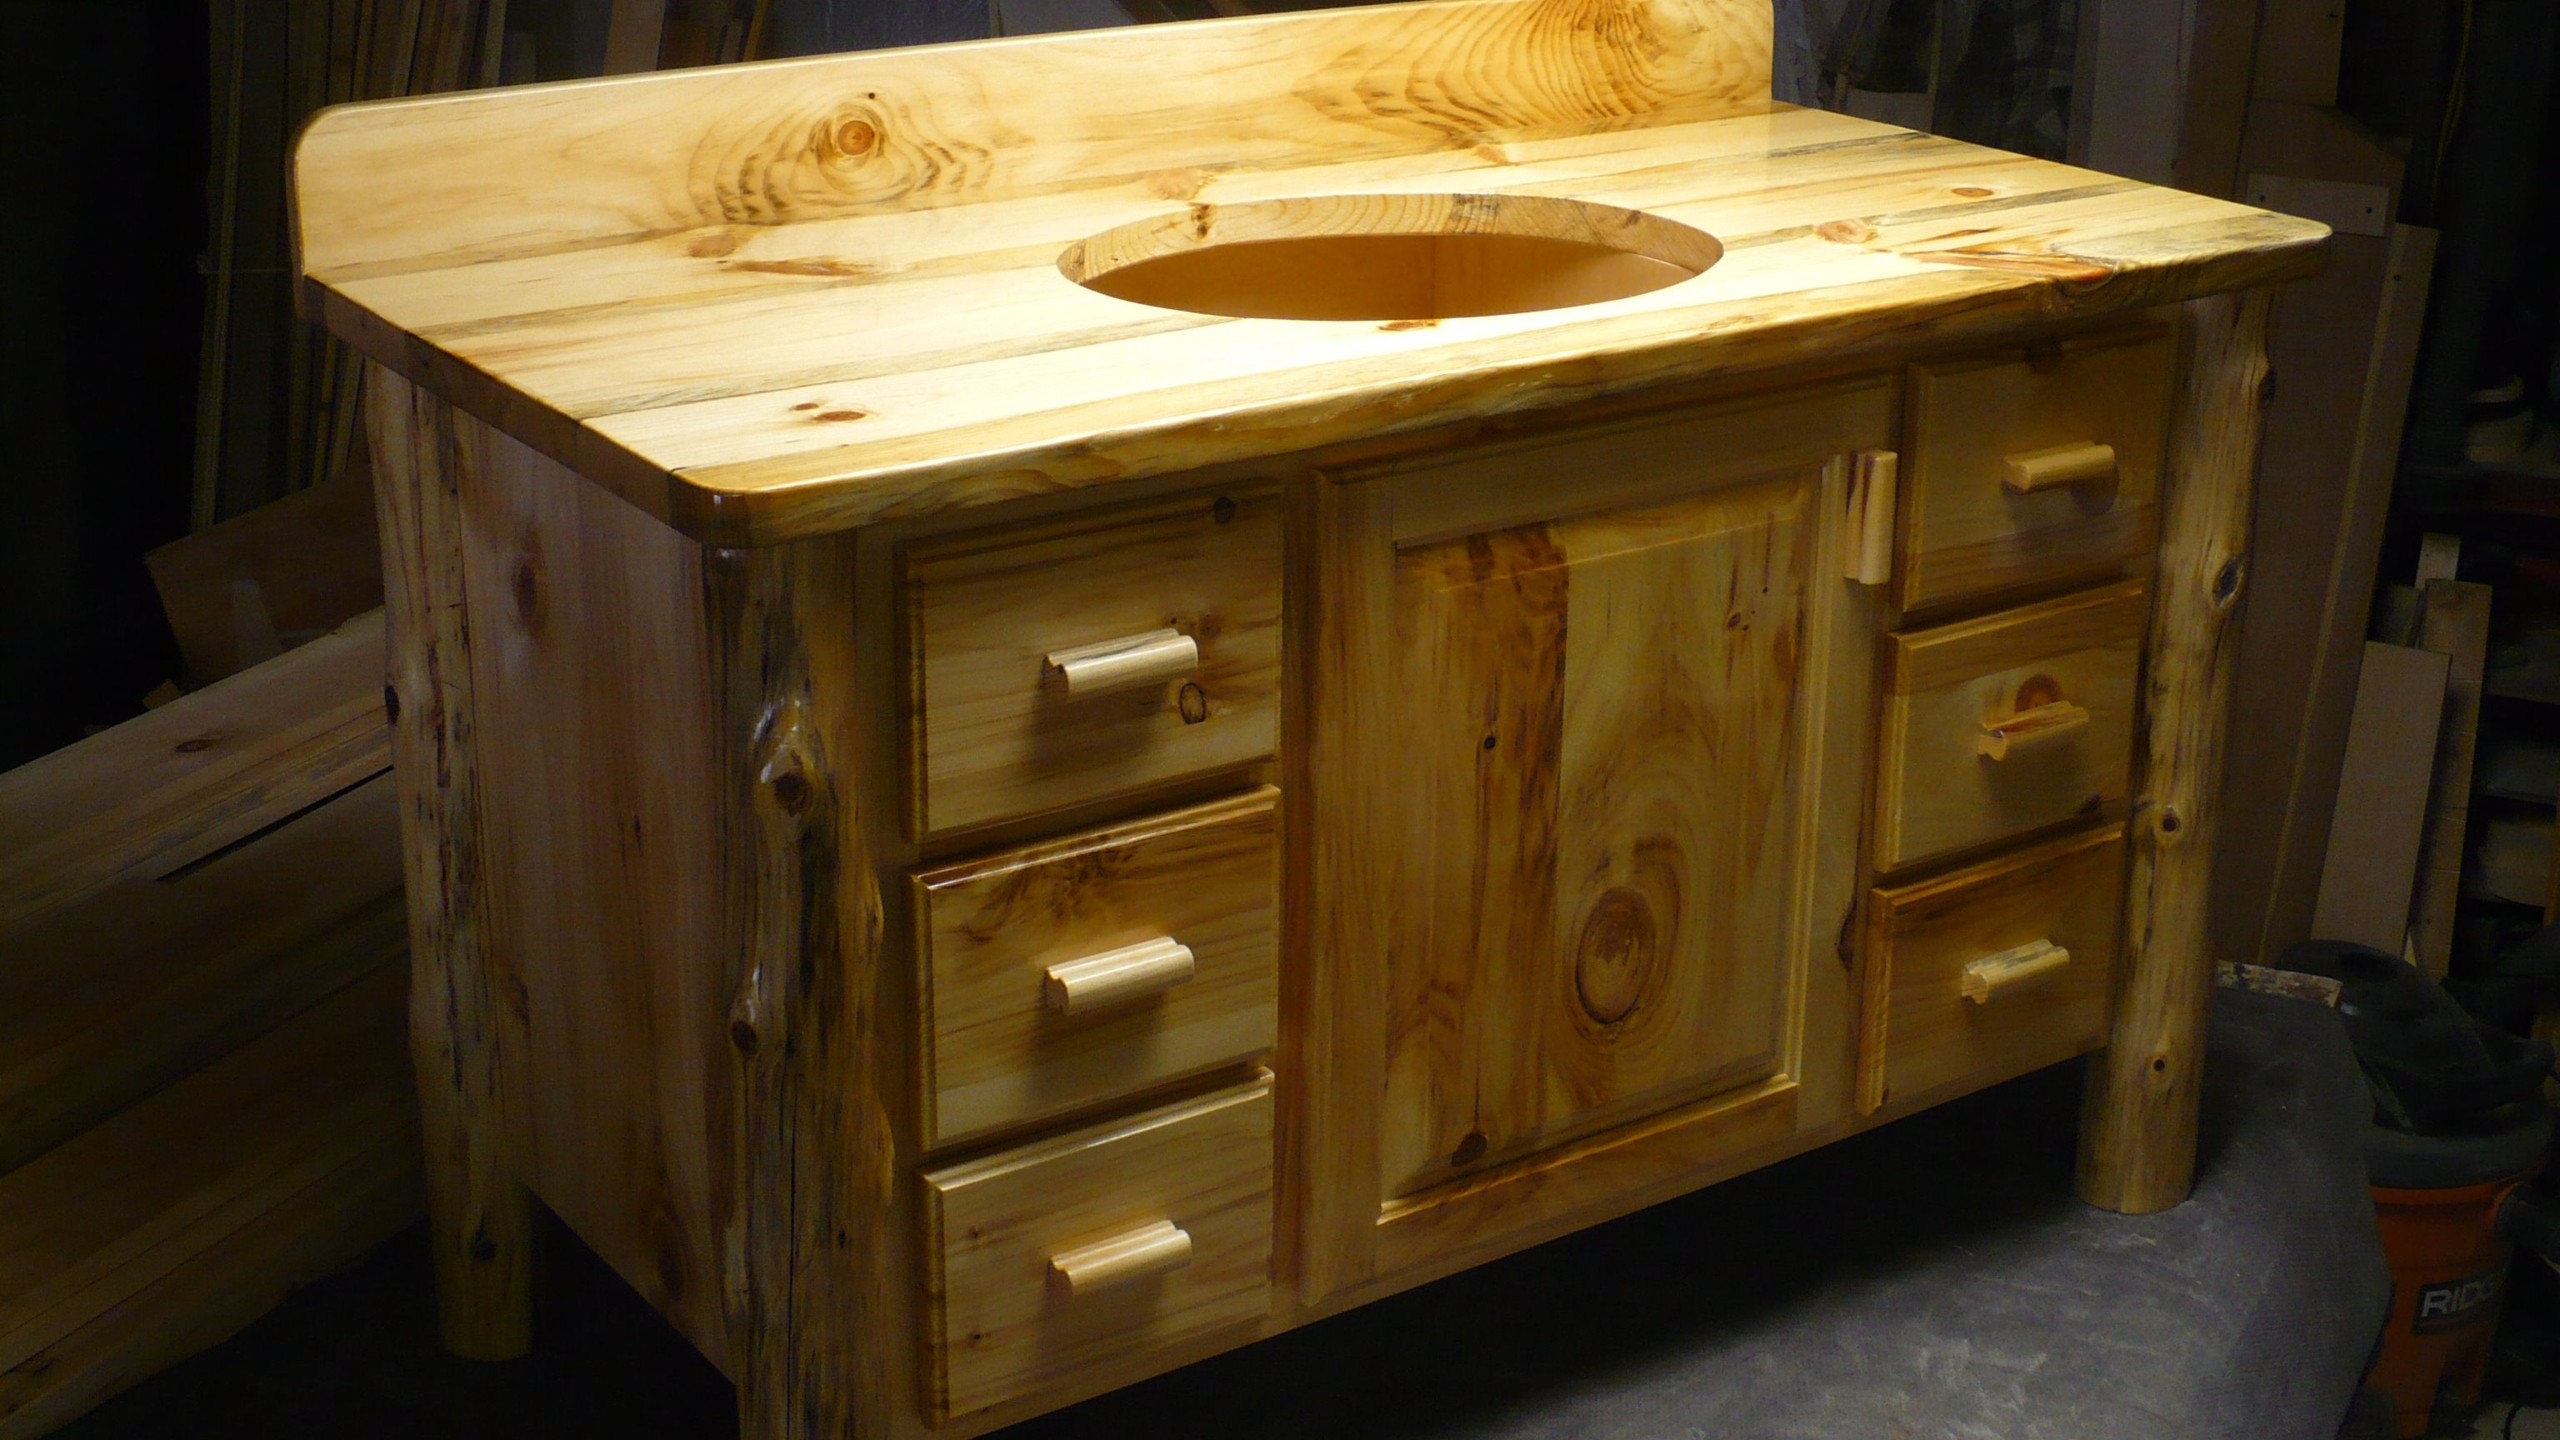 Hand made knotty pine bathroom vanity by harrys cabin